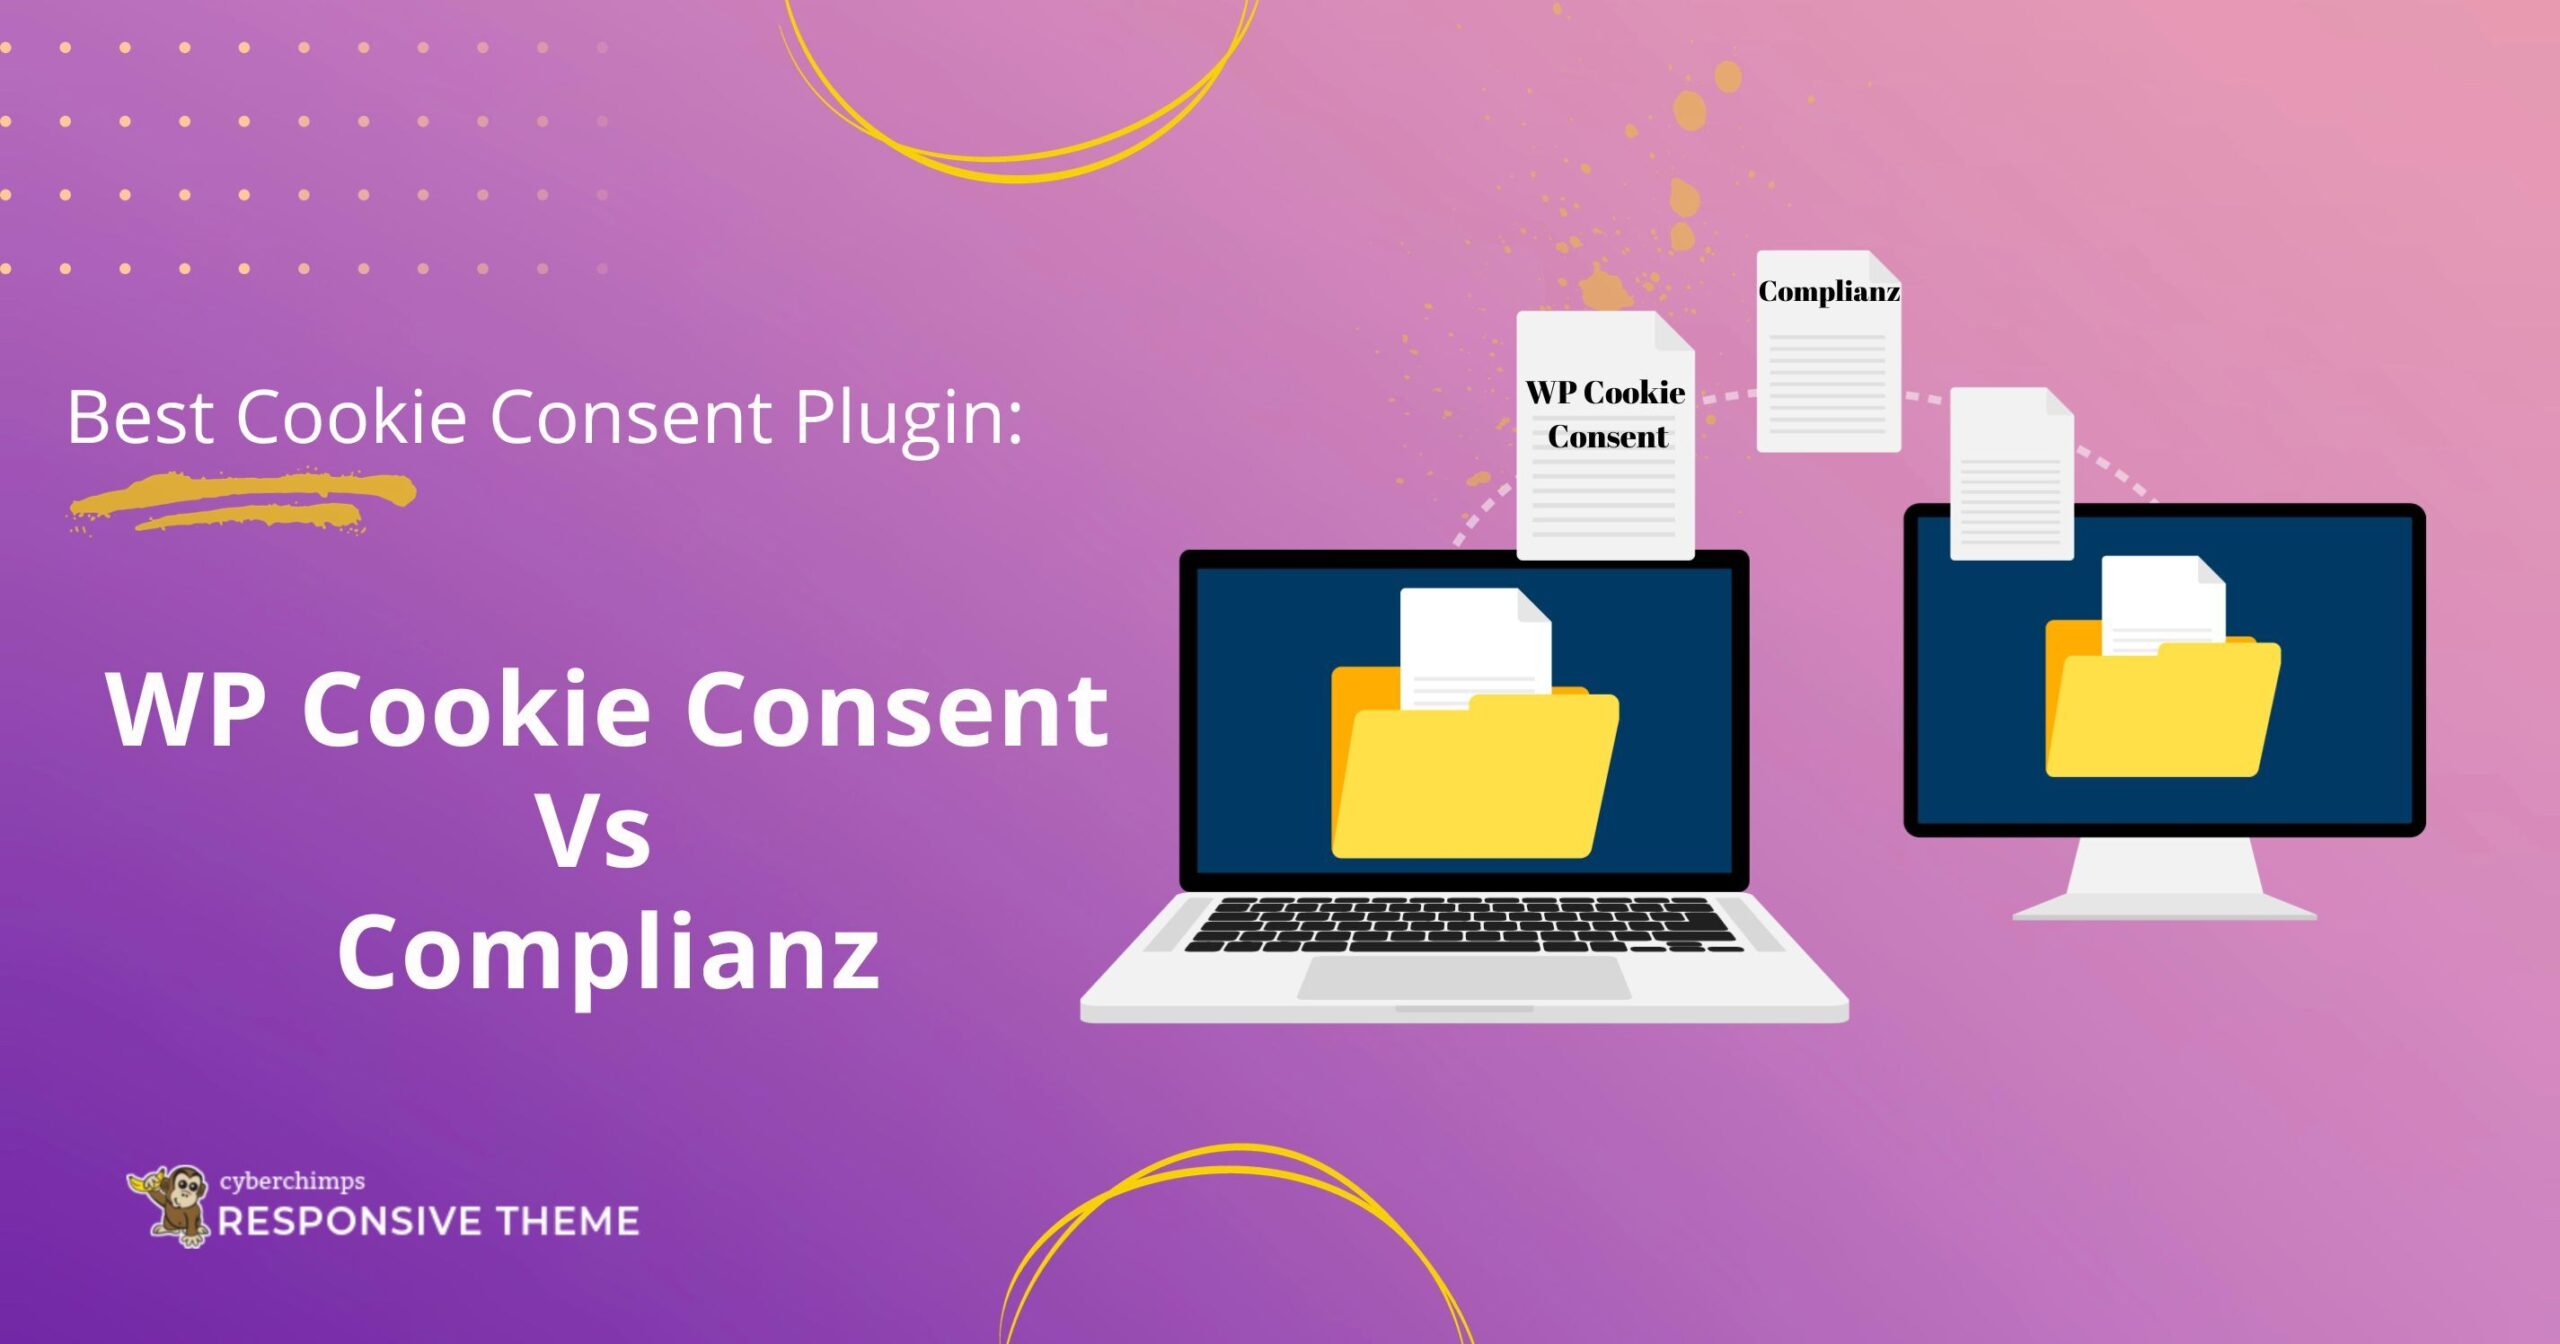 WP Cookie Consent Vs Complianz Review